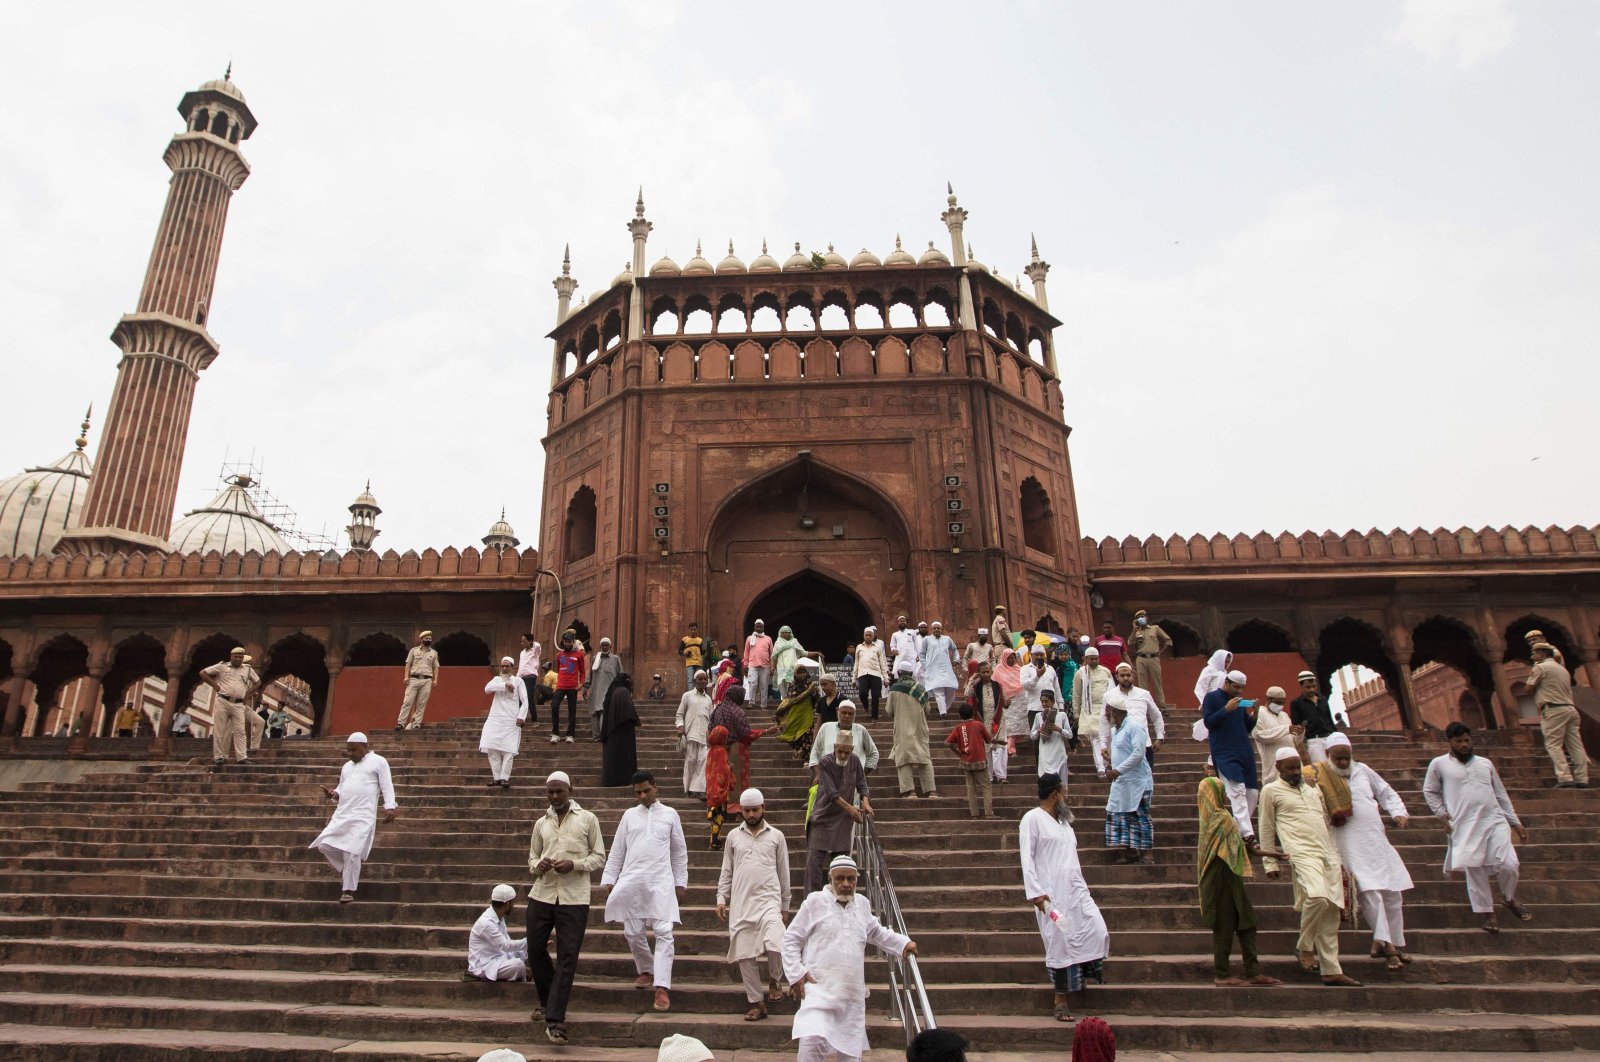 Muslims leave after offering Friday noon prayer at the Jama Masjid in New Delhi, India, June 17, 2022. (AFP Photo)